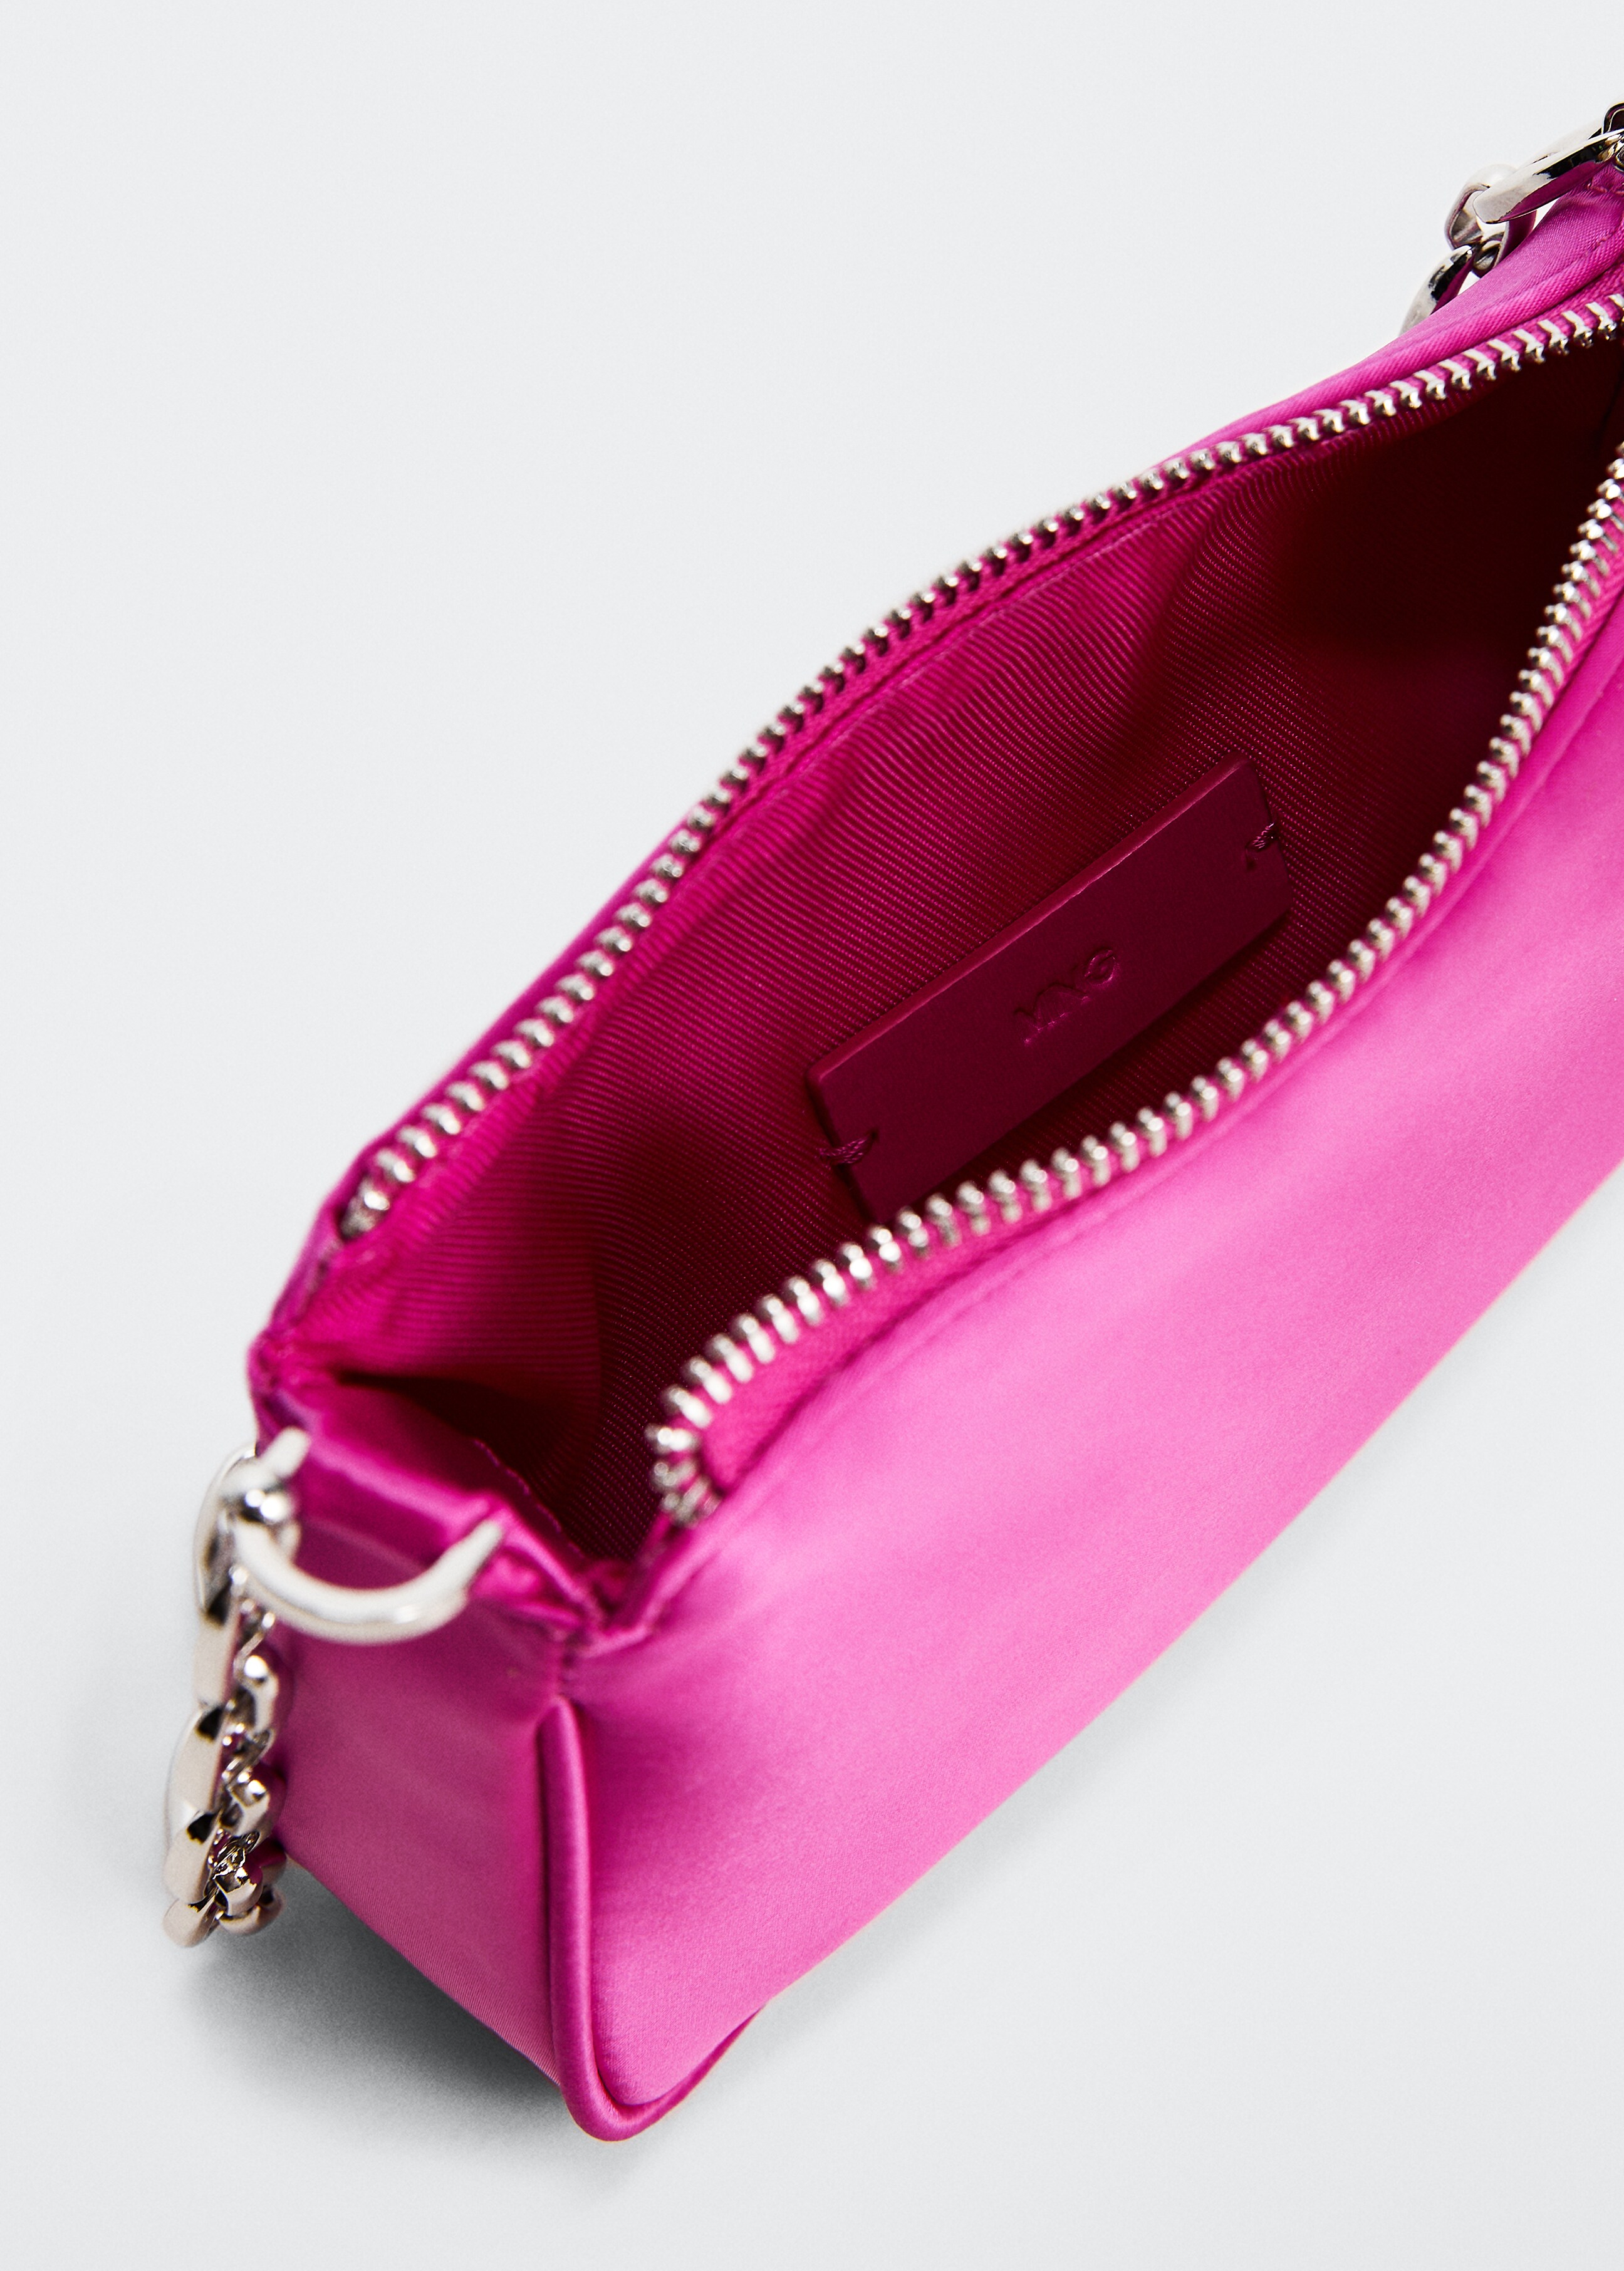 Satin chain bag - Details of the article 2